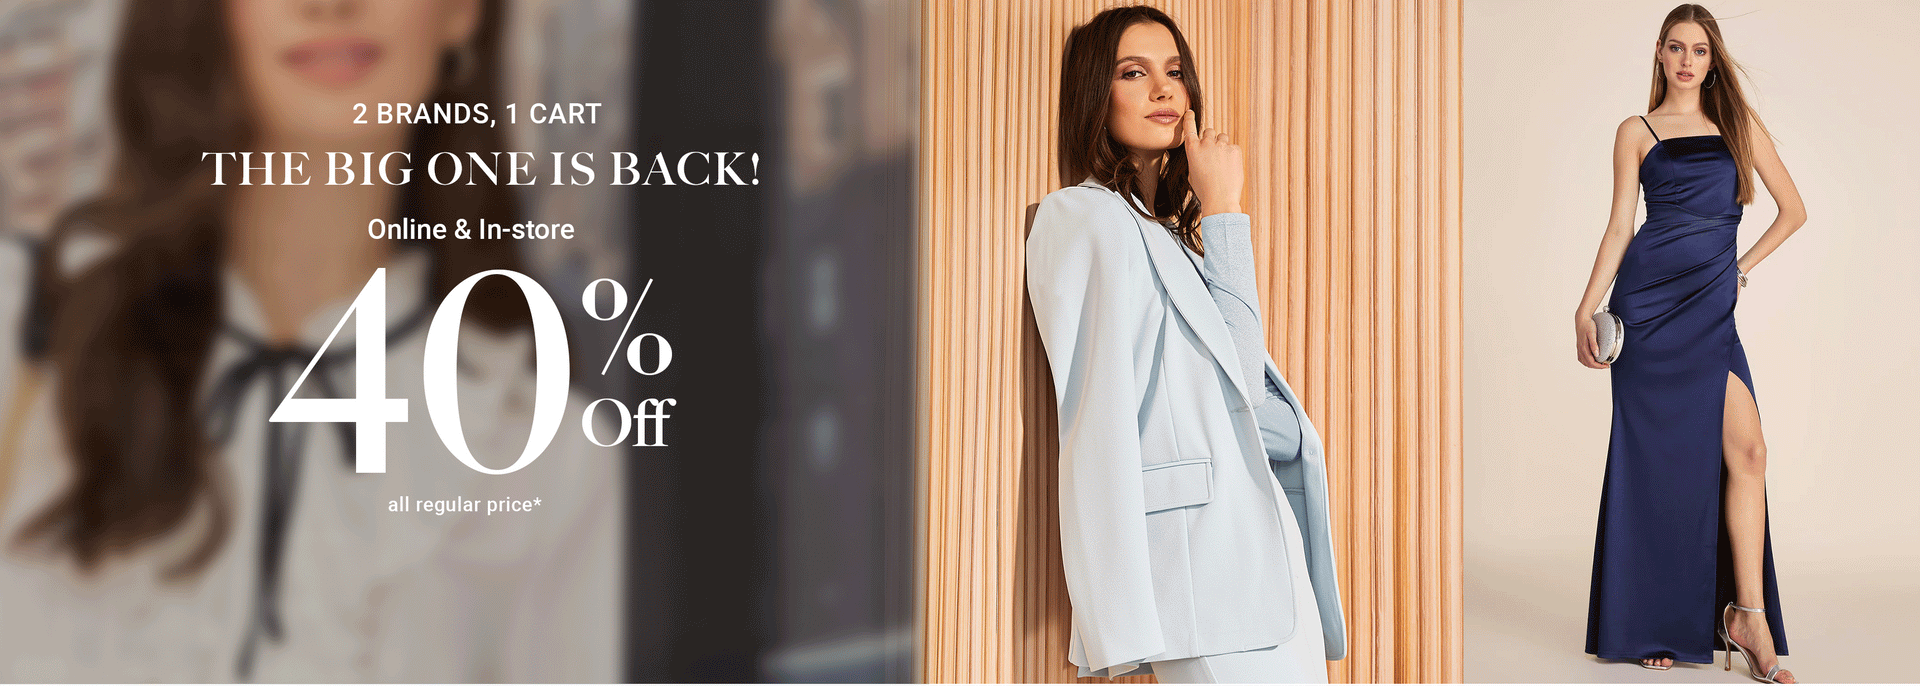 The big one is back - shop 40% off Le Chateau and Suzy Shier.